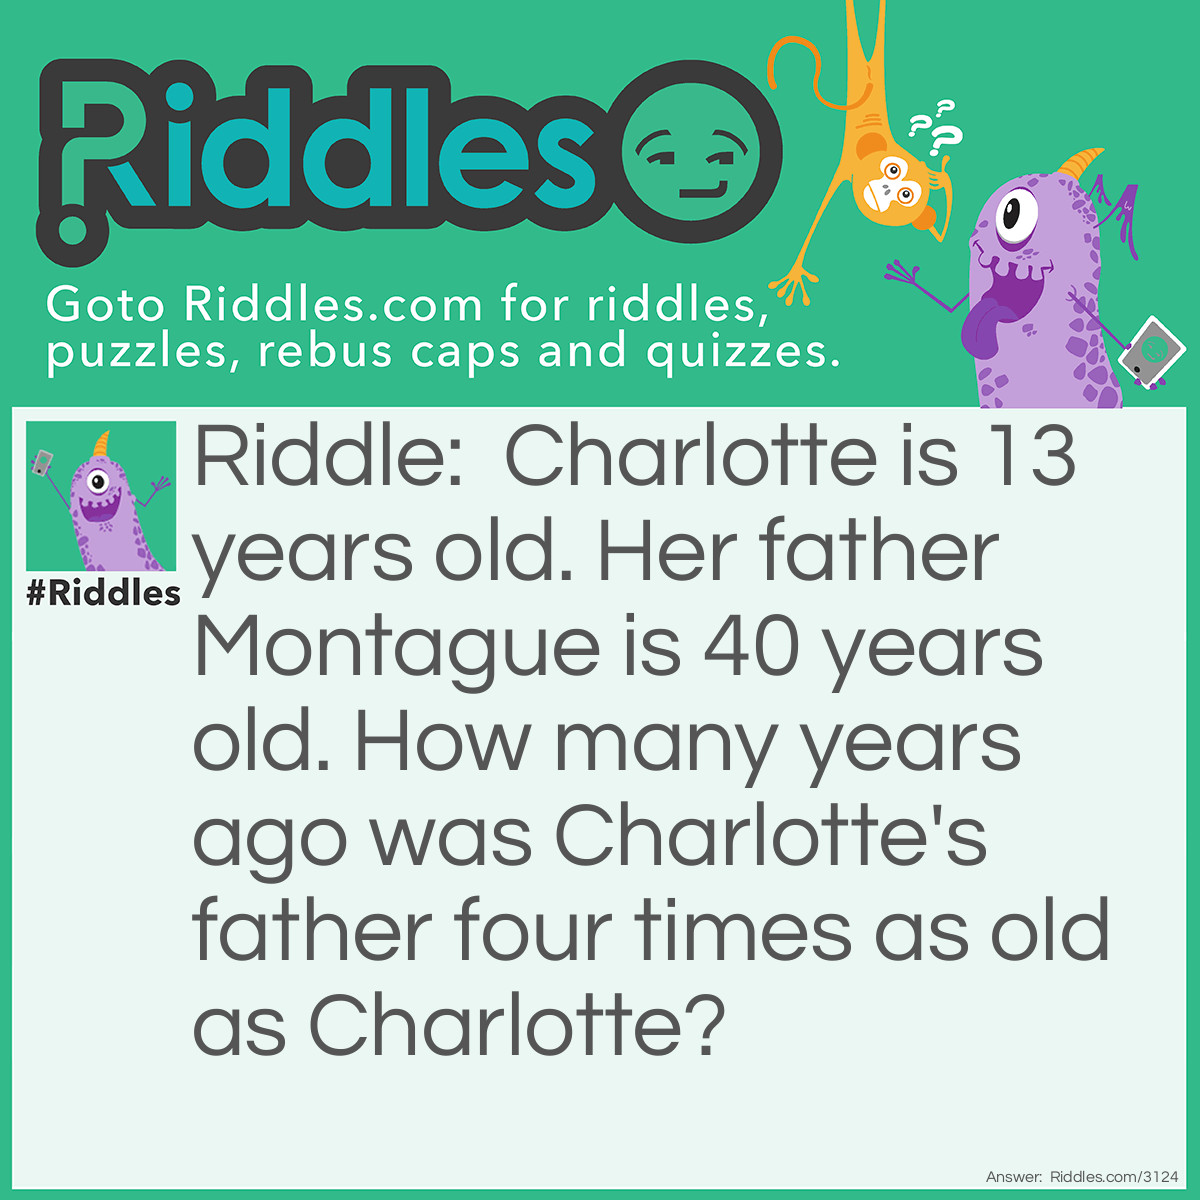 Riddle: Charlotte is 13 years old. Her father Montague is 40 years old. How many years ago was Charlotte's father four times as old as Charlotte? Answer: Four years ago. When Charlotte was 9 her father was 36, 4 times her age.